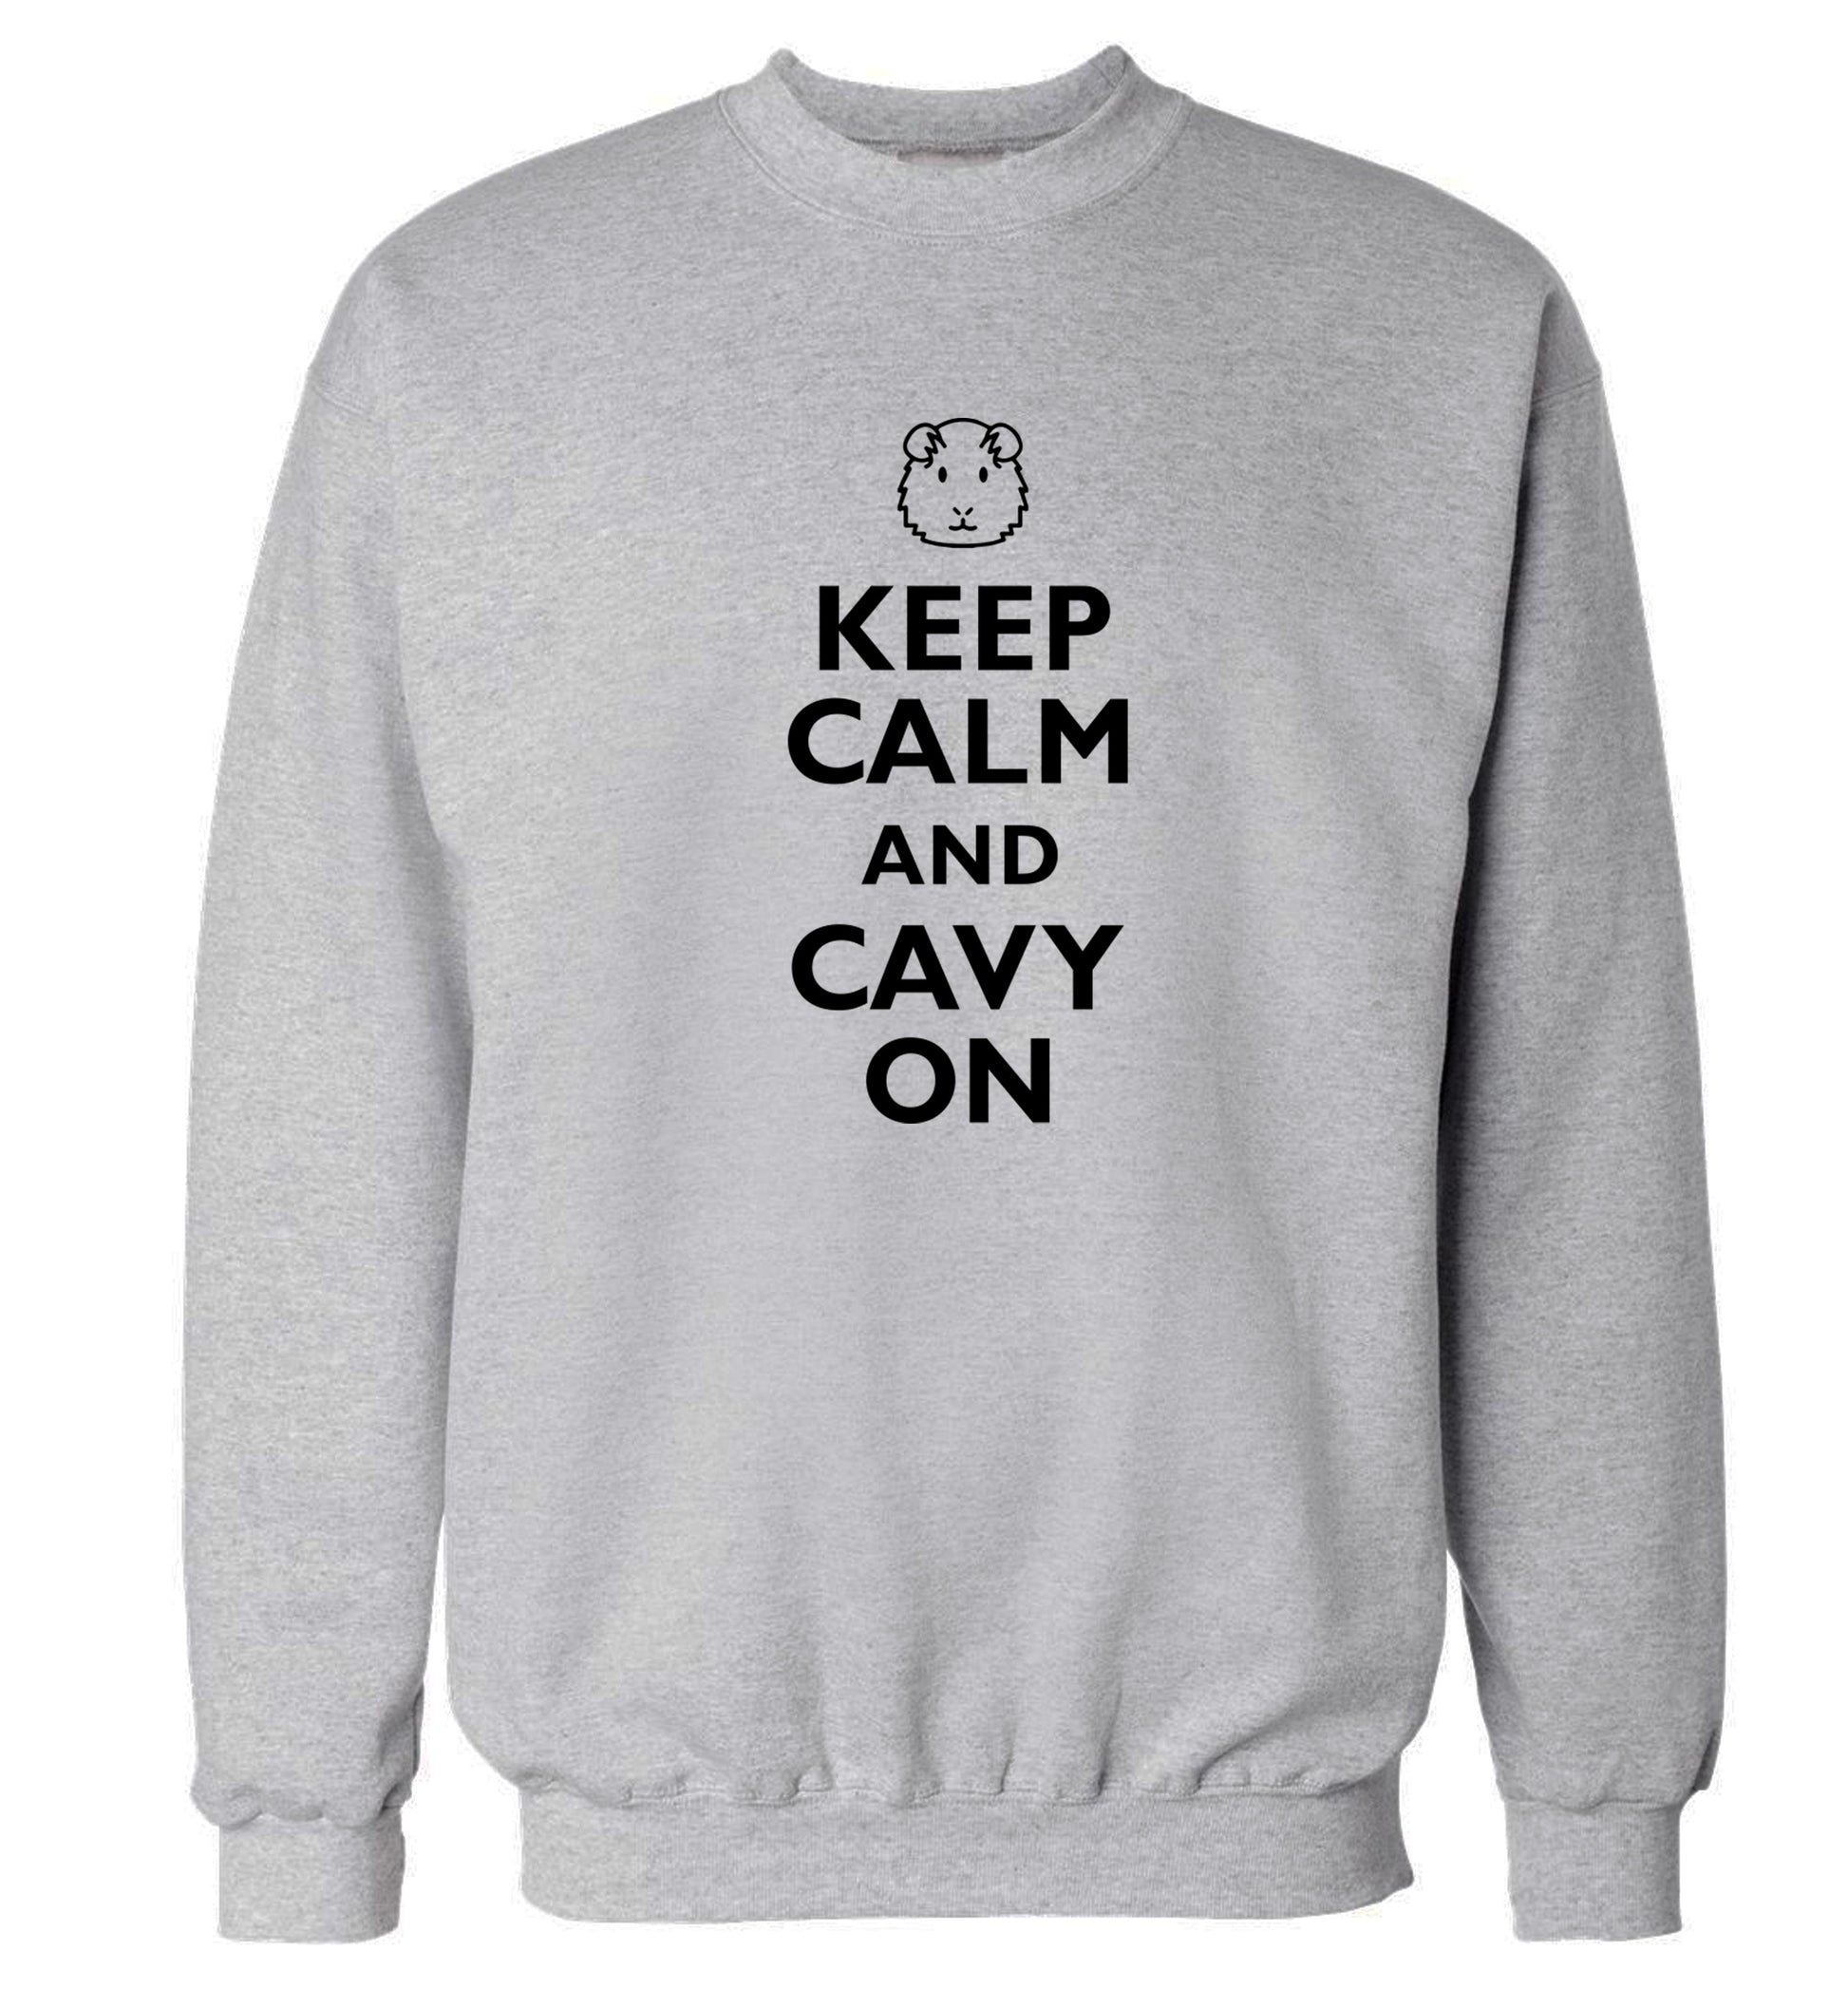 Keep calm and cavvy on Adult's unisex grey  sweater 2XL